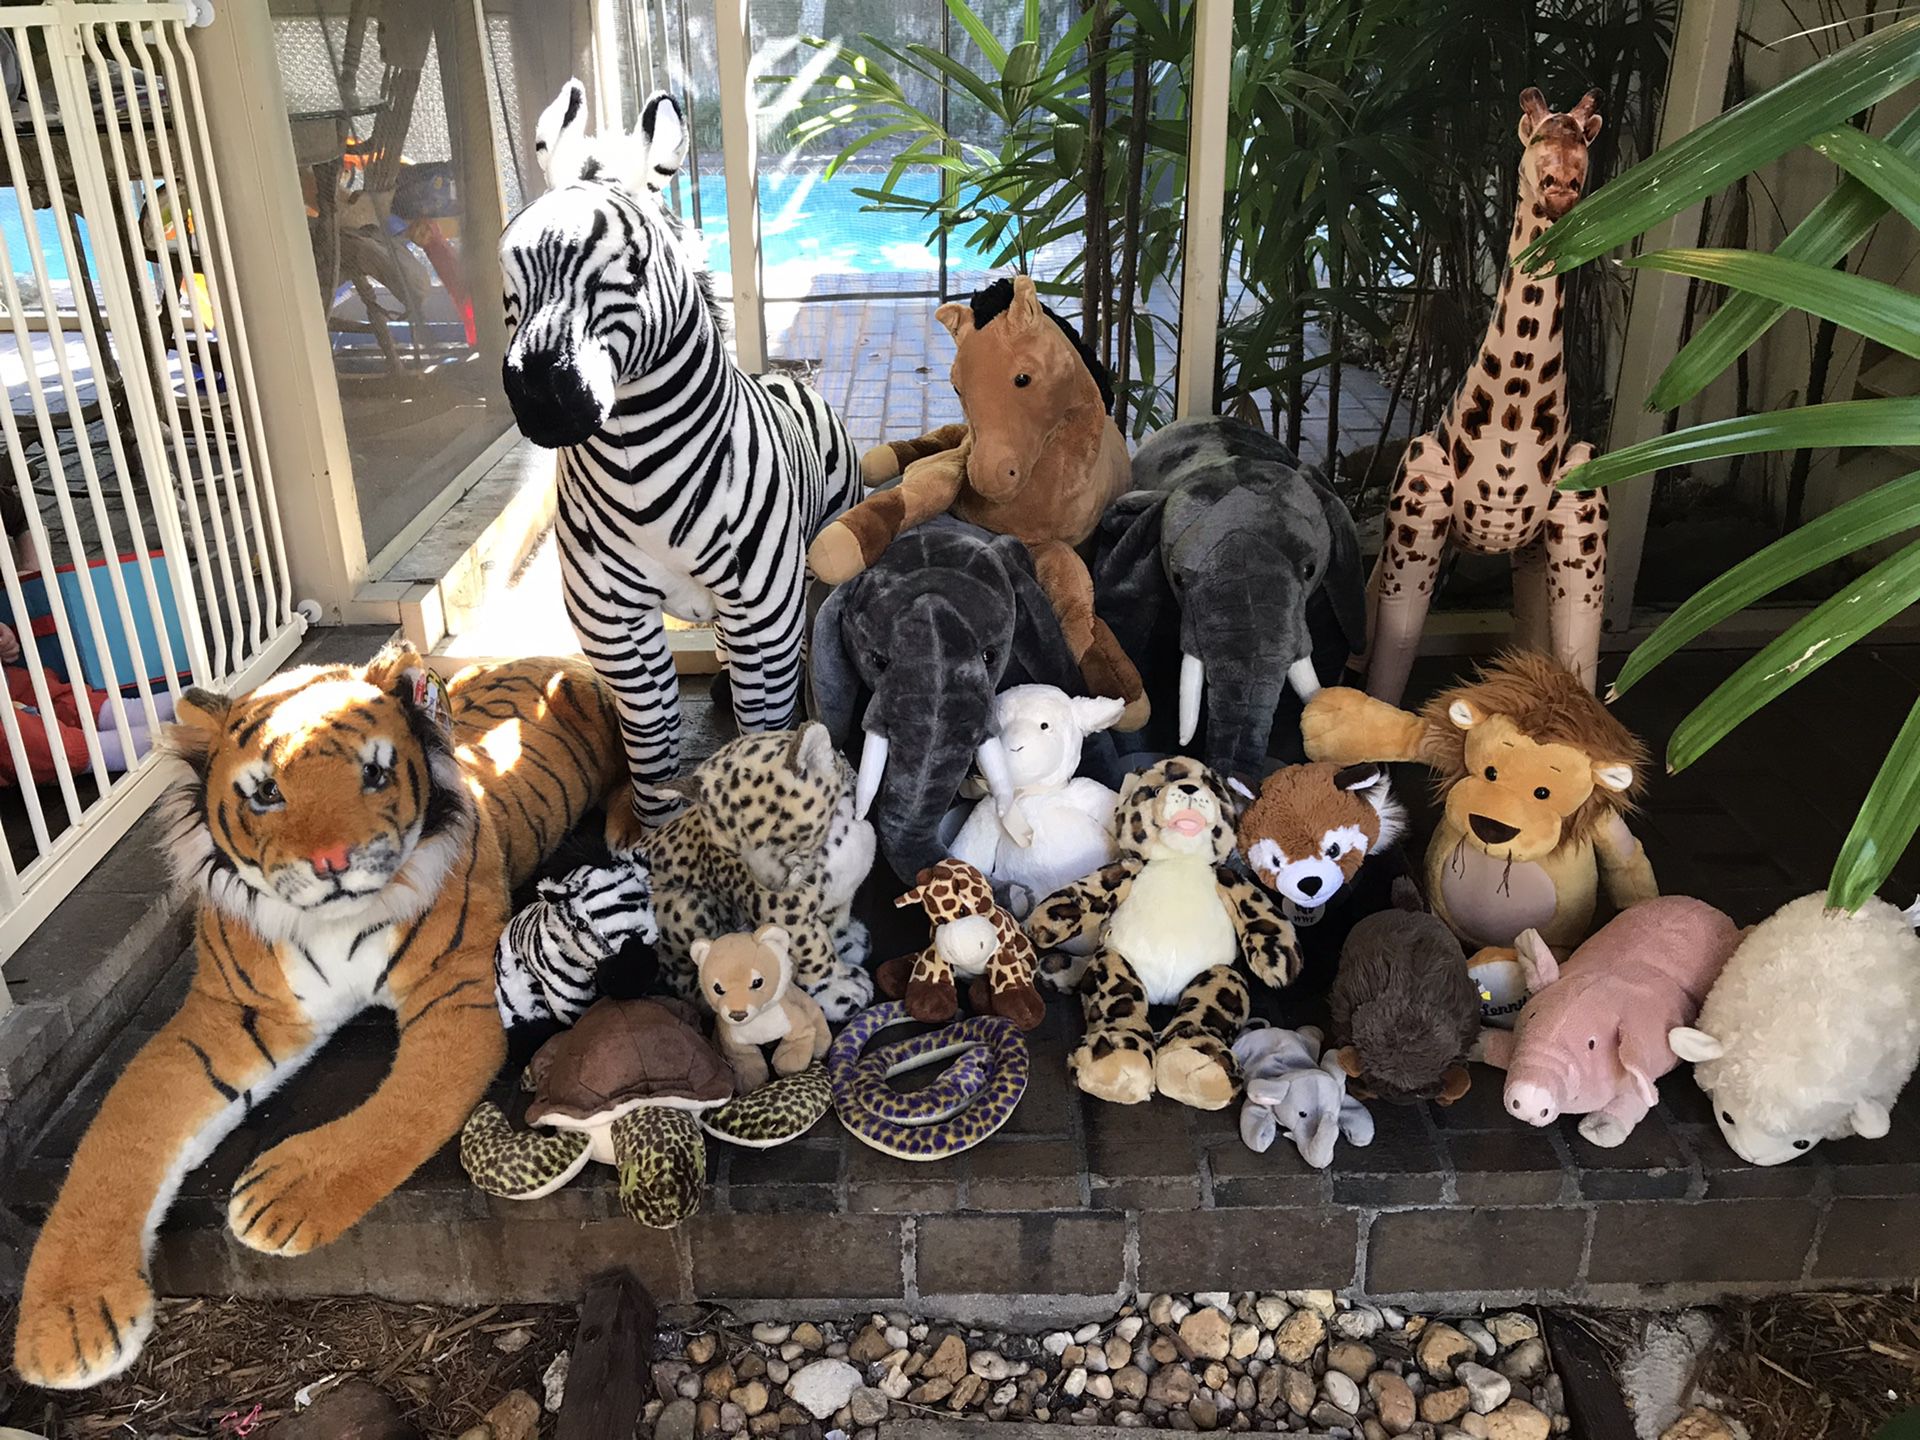 Safari stuffed animals - big and small (UPDATE-only smalls left)